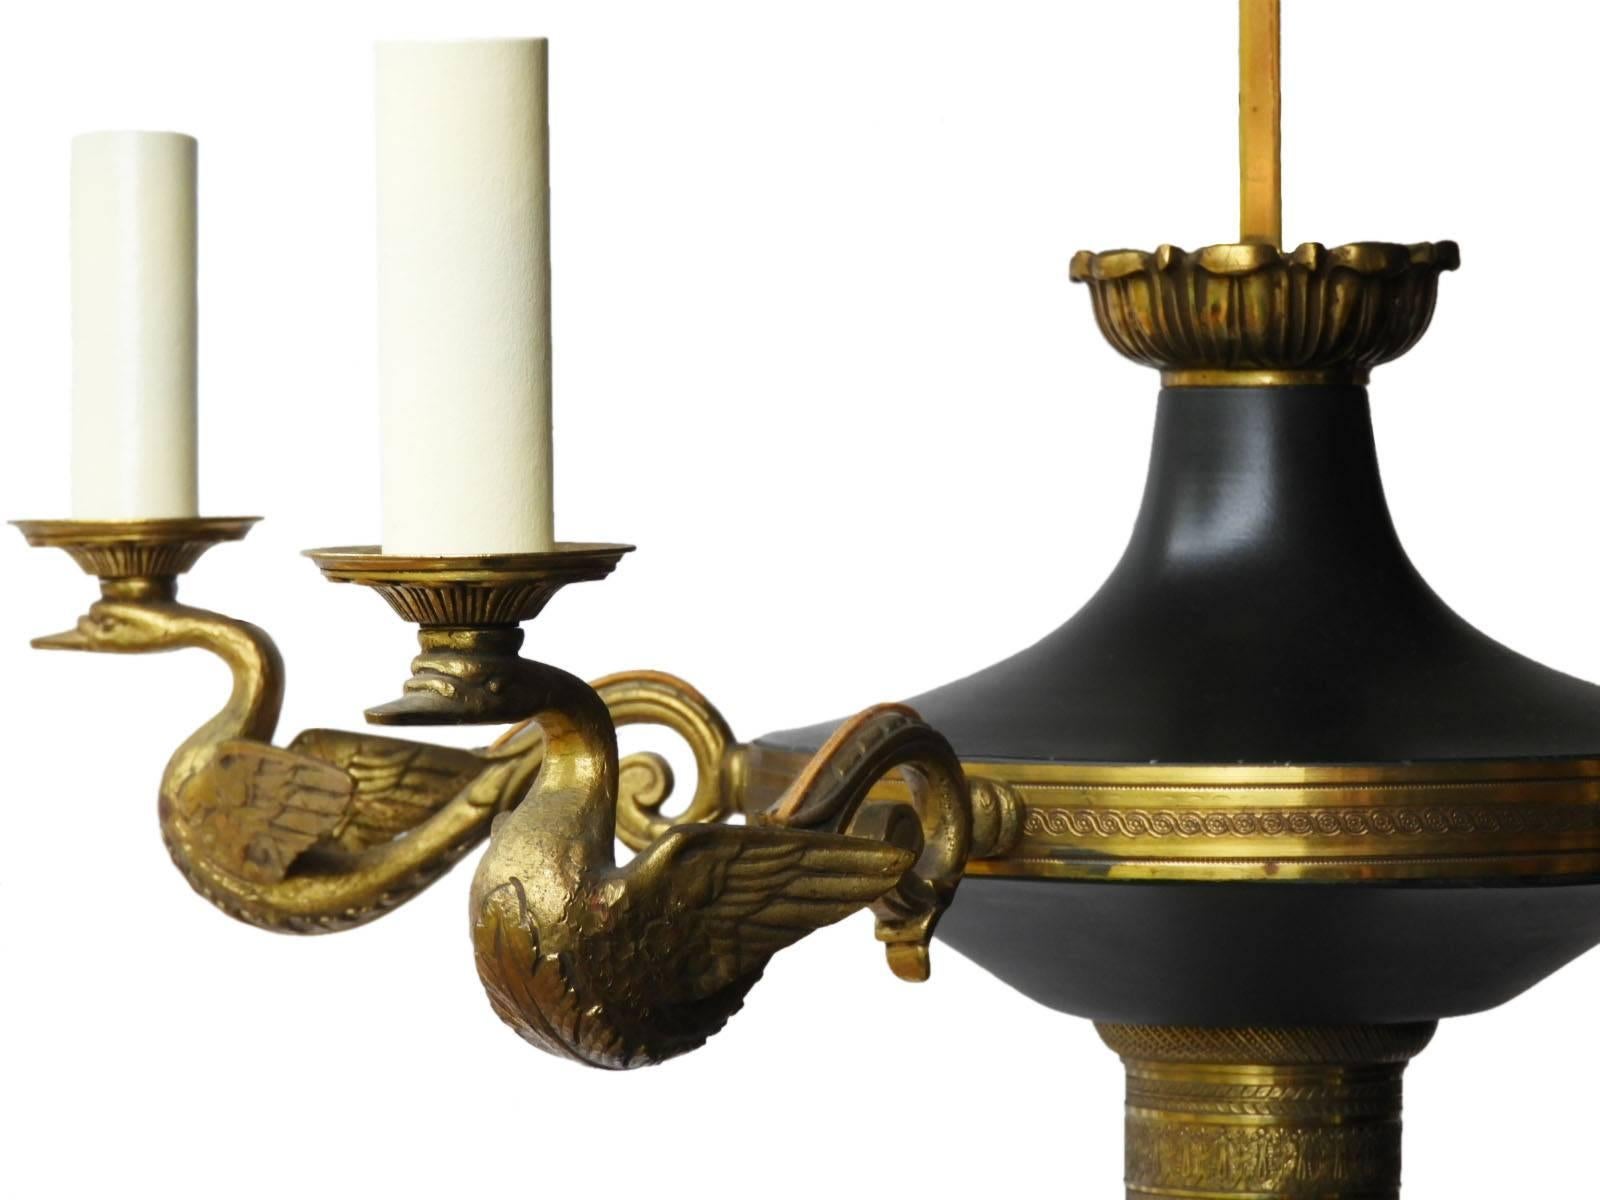 French empire floor lamp French Empire revival early 20th century.
Five branch swan candle lights.
Bronze ormolu details
 Original finish very dark green metal heavyweight bronze with good patina
This will be rewired and tested to USA or UK and